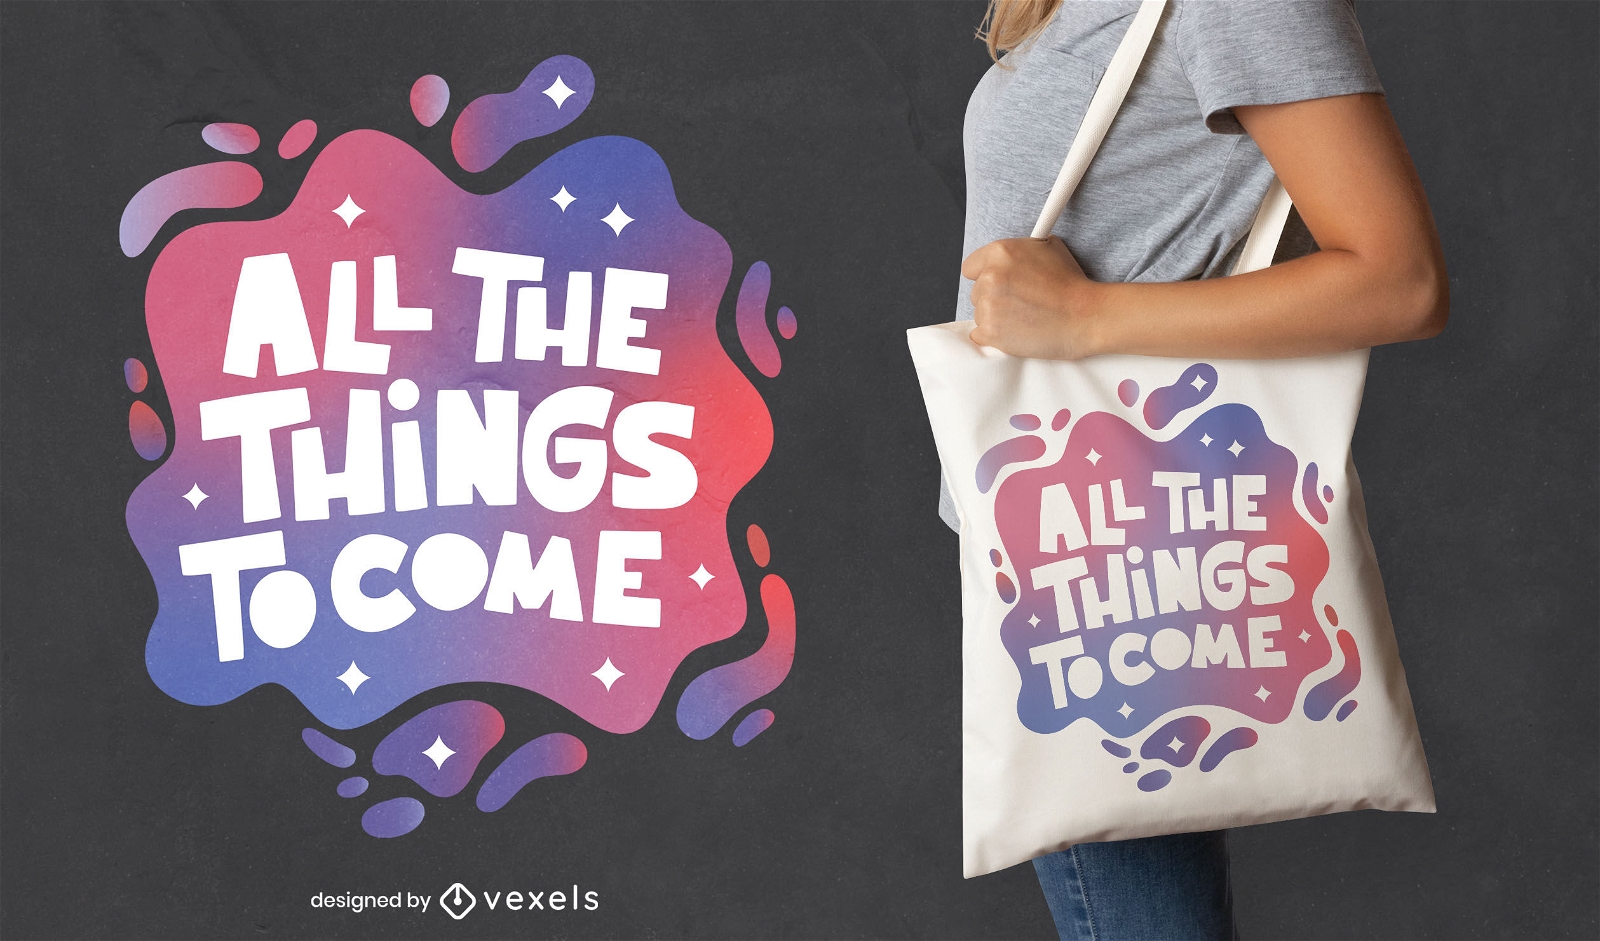 Things to come quote tote bag design